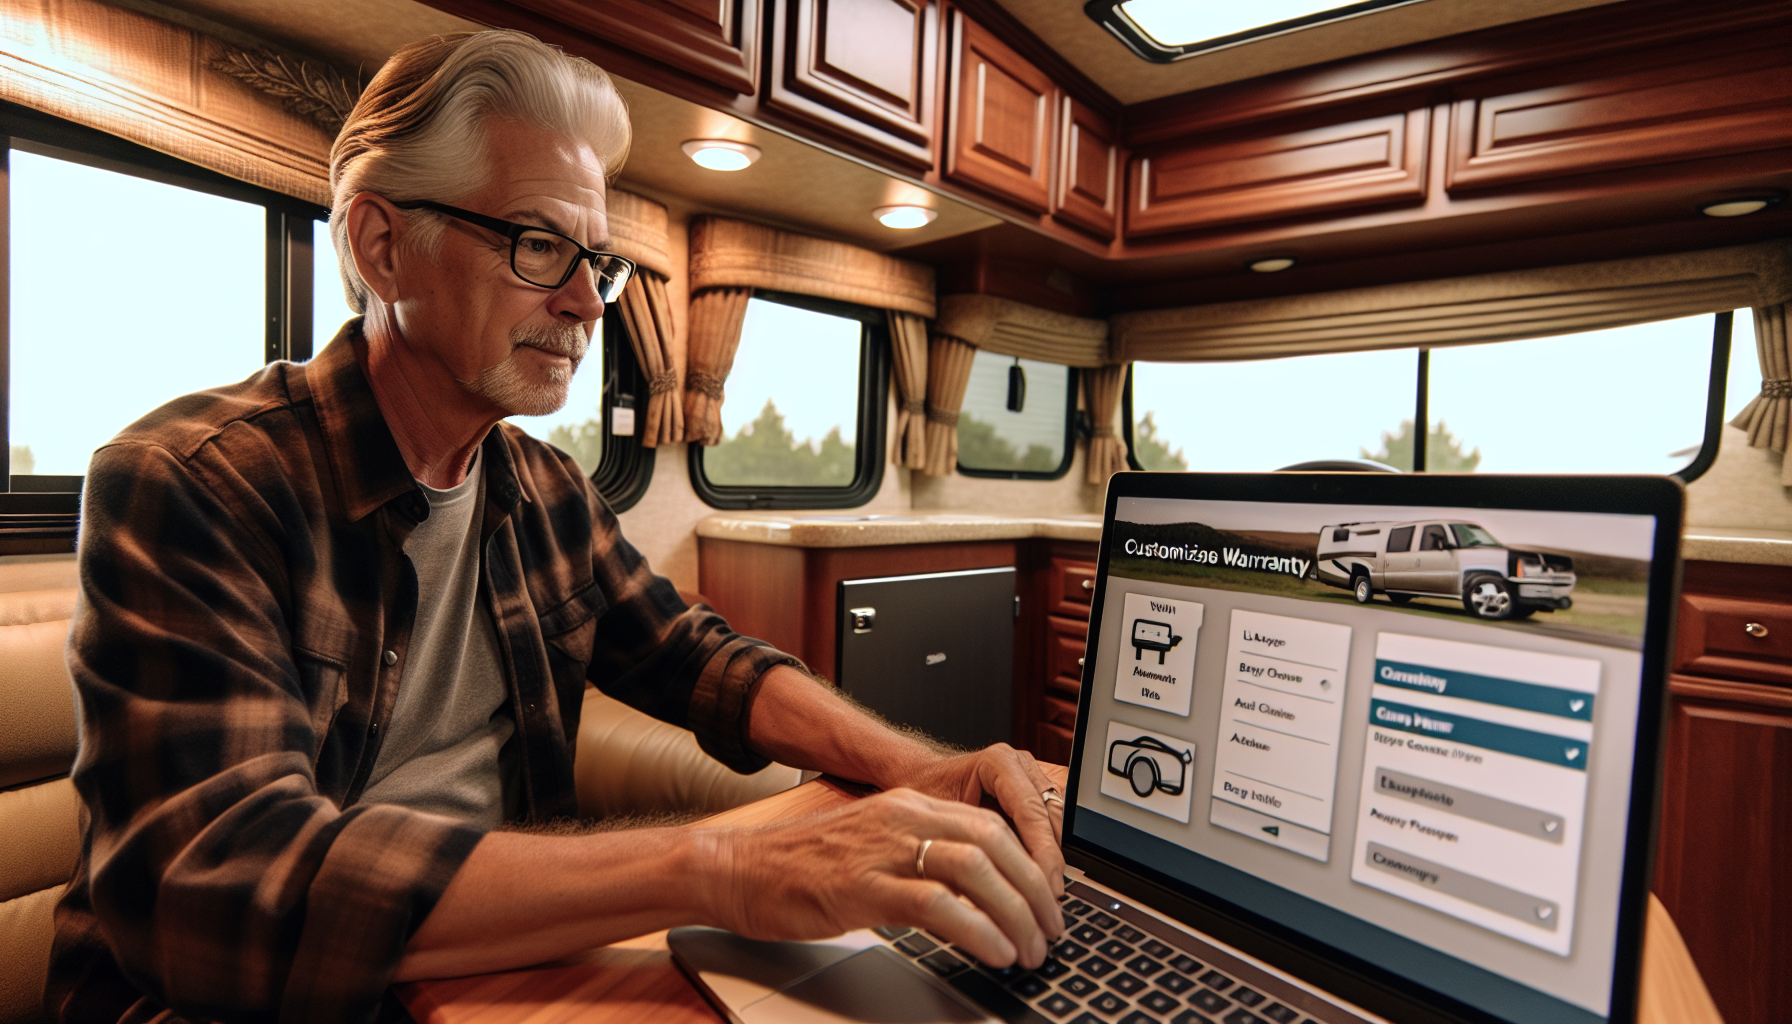 Personalizing RV warranty based on usage patterns and maintenance frequency